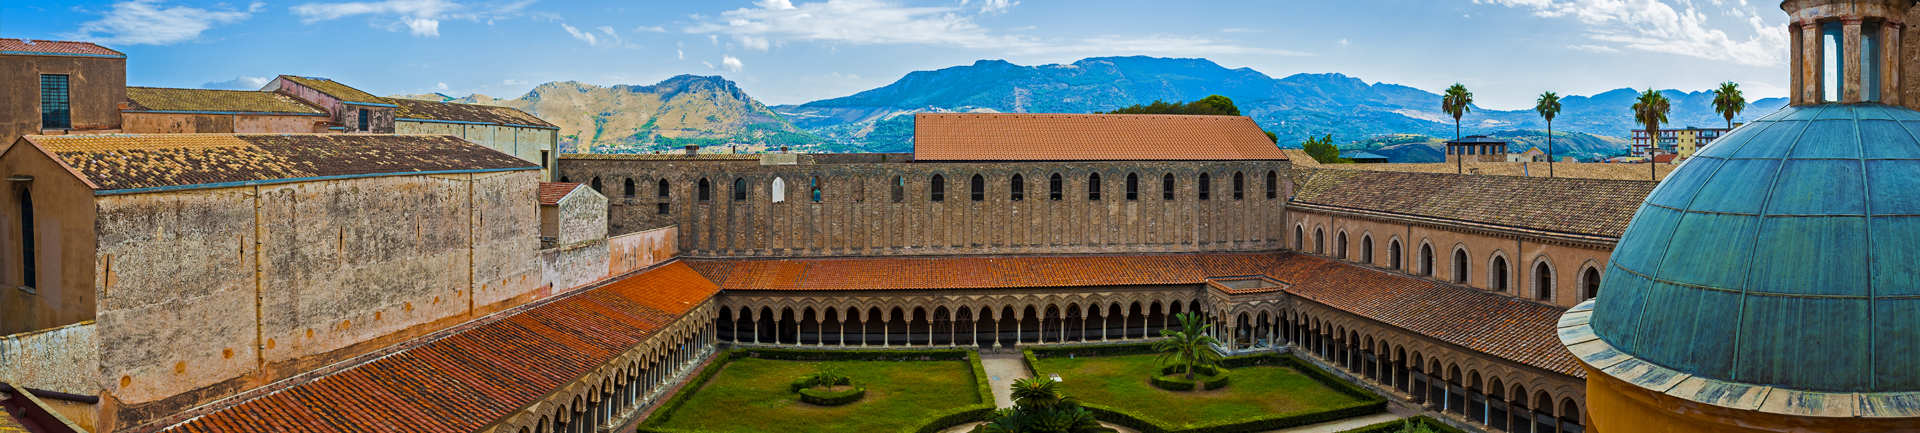 Monreale, golden mosaics and echoes of distant civilizations